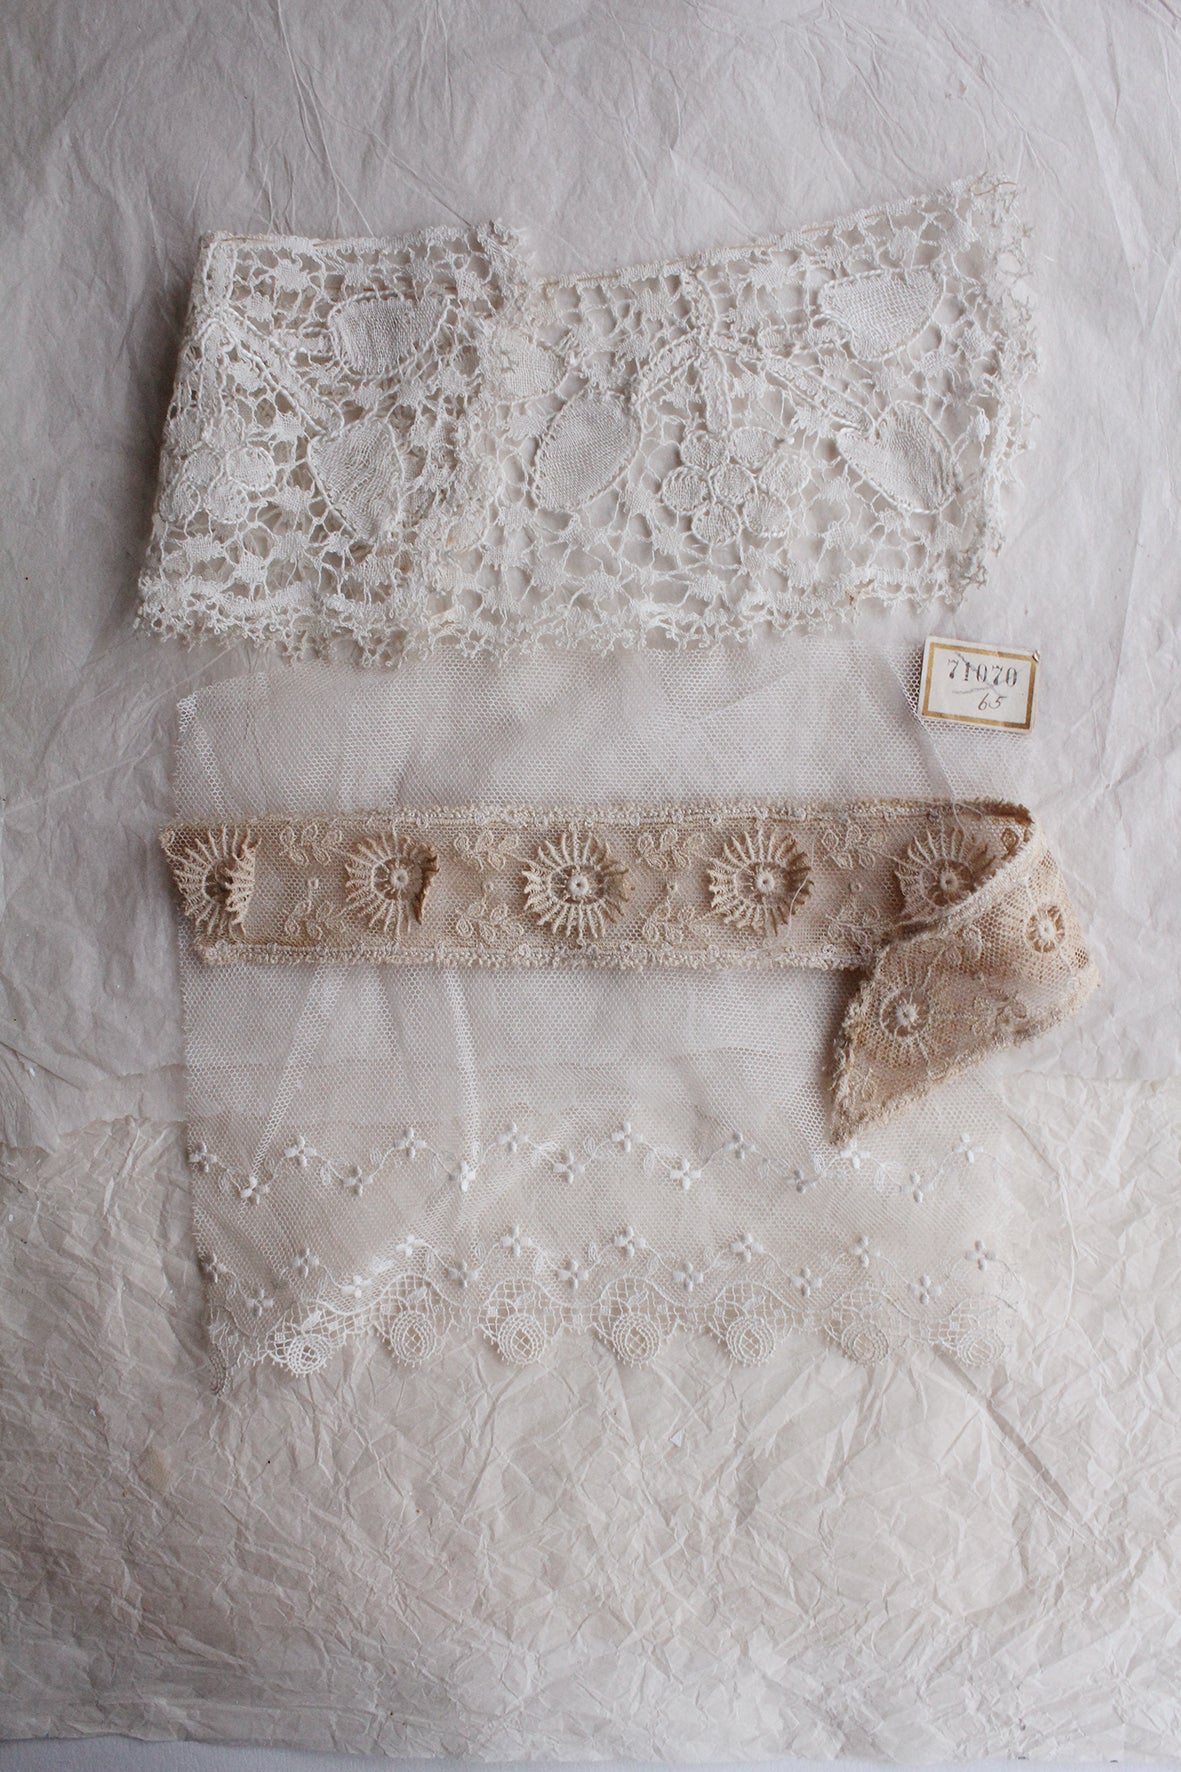 Collection of Antique Lace Samples - B1